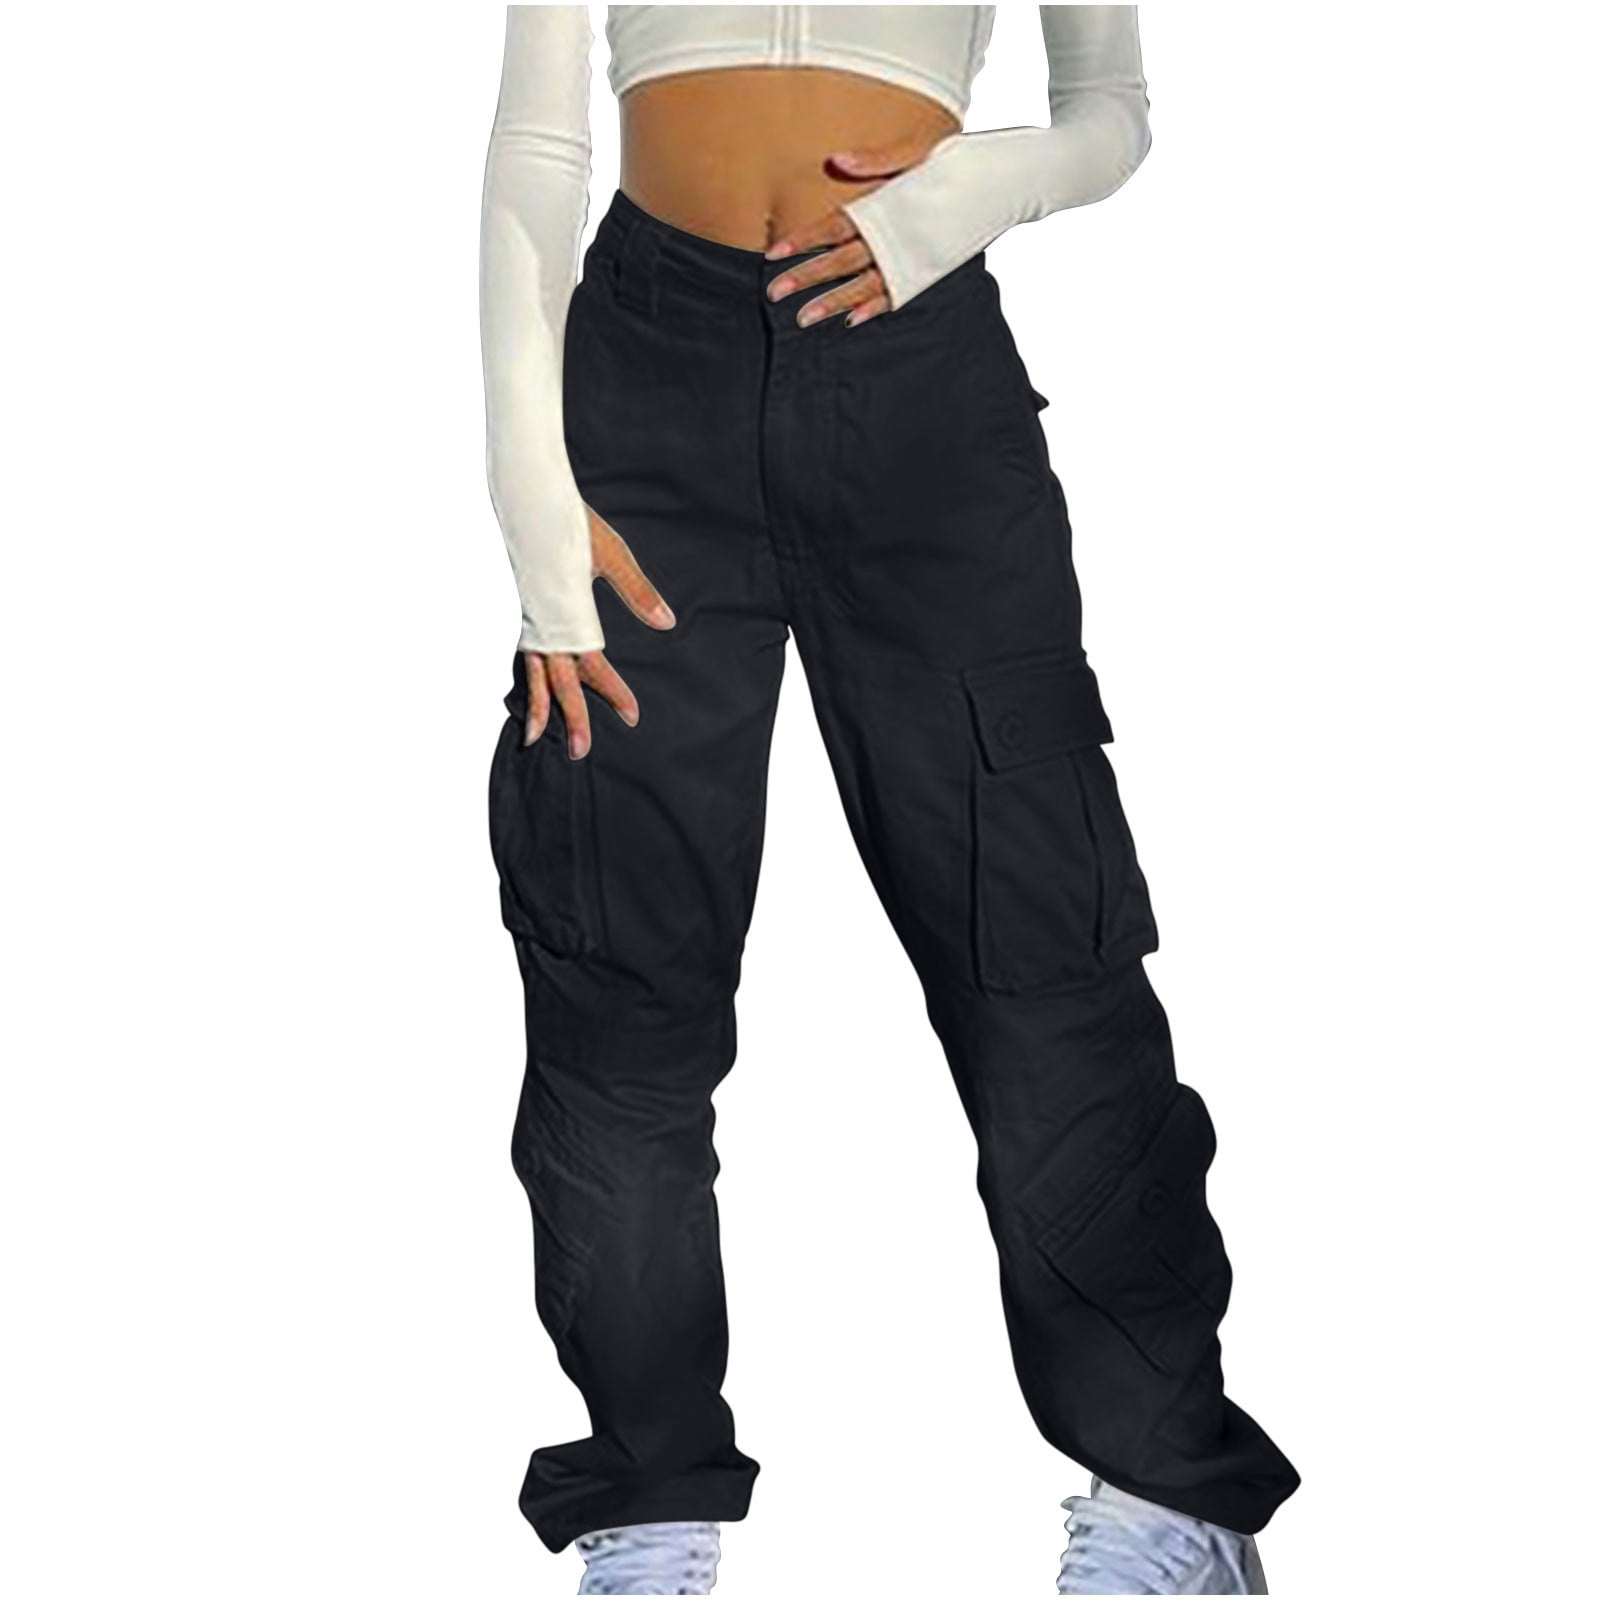 Cargo sweatpants for women long Casual Trousers High Waist Drawstring With  Multi-Pockets Long Pants jogger pants work pants for women Khaki XL